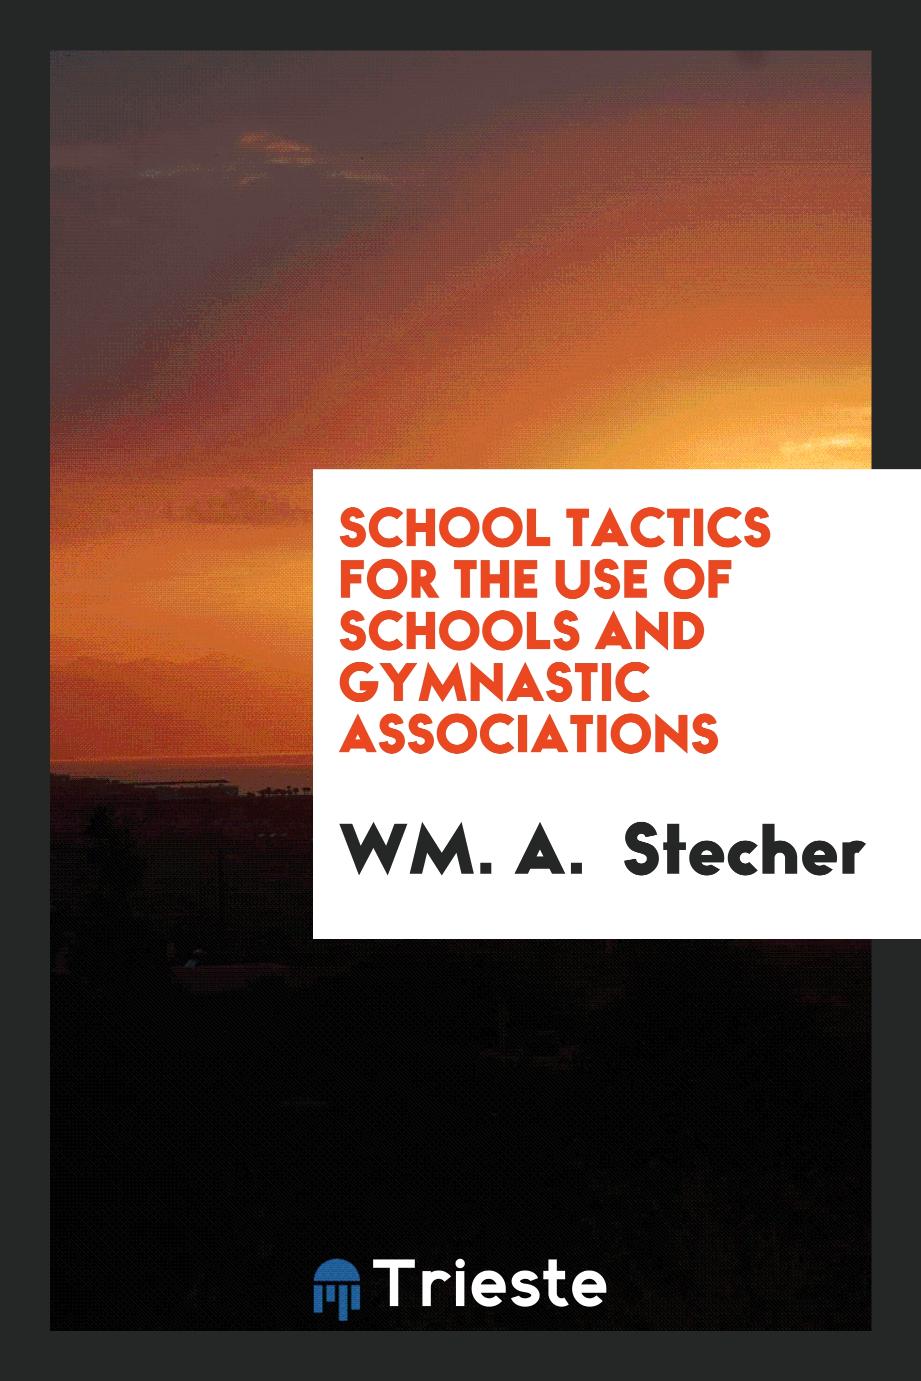 School Tactics for the Use of Schools and Gymnastic Associations